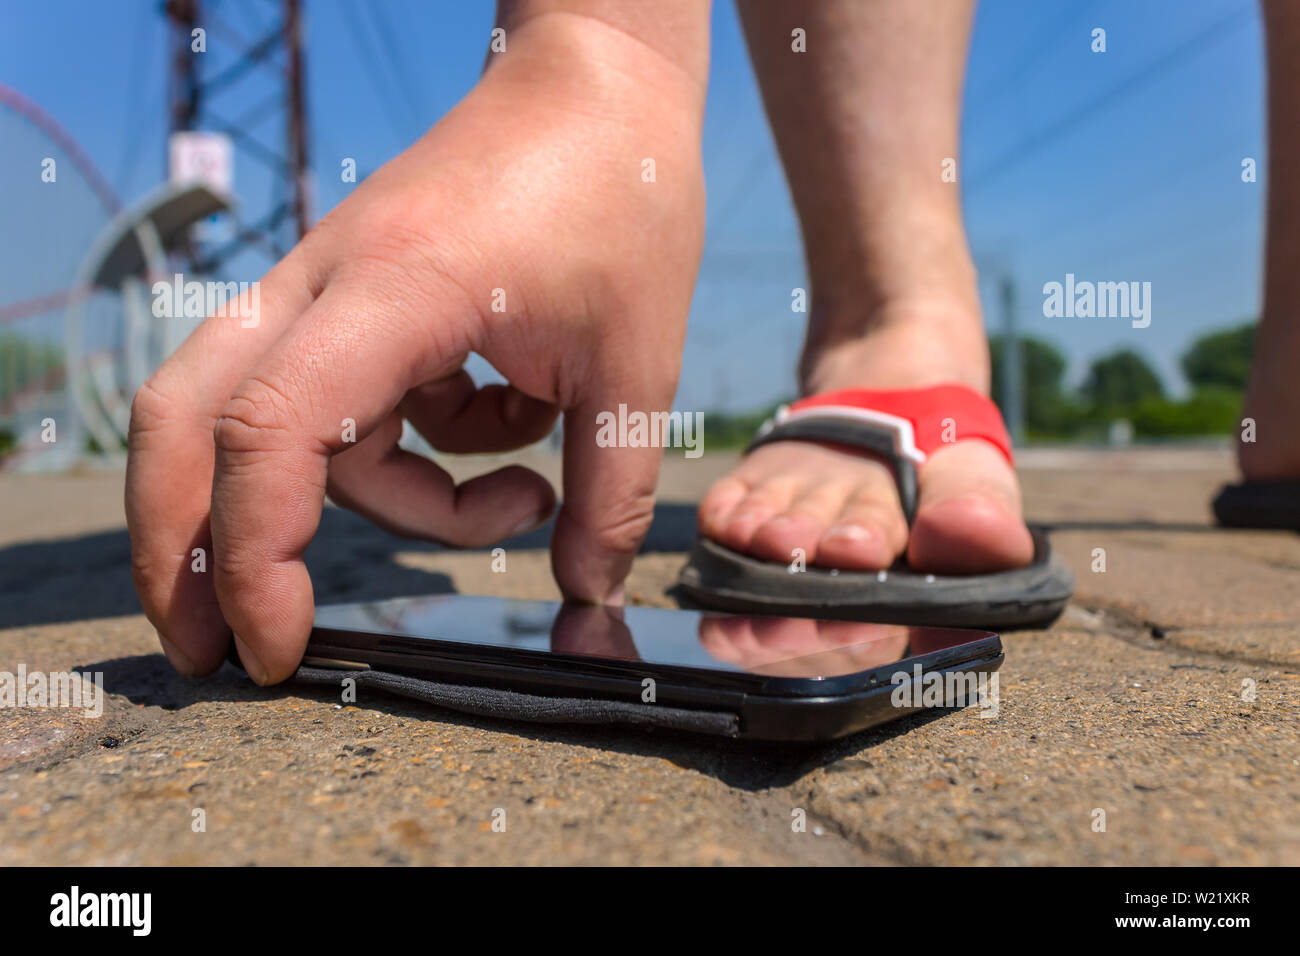 A man lifts a smartphone in a public park fallen on the road Stock Photo